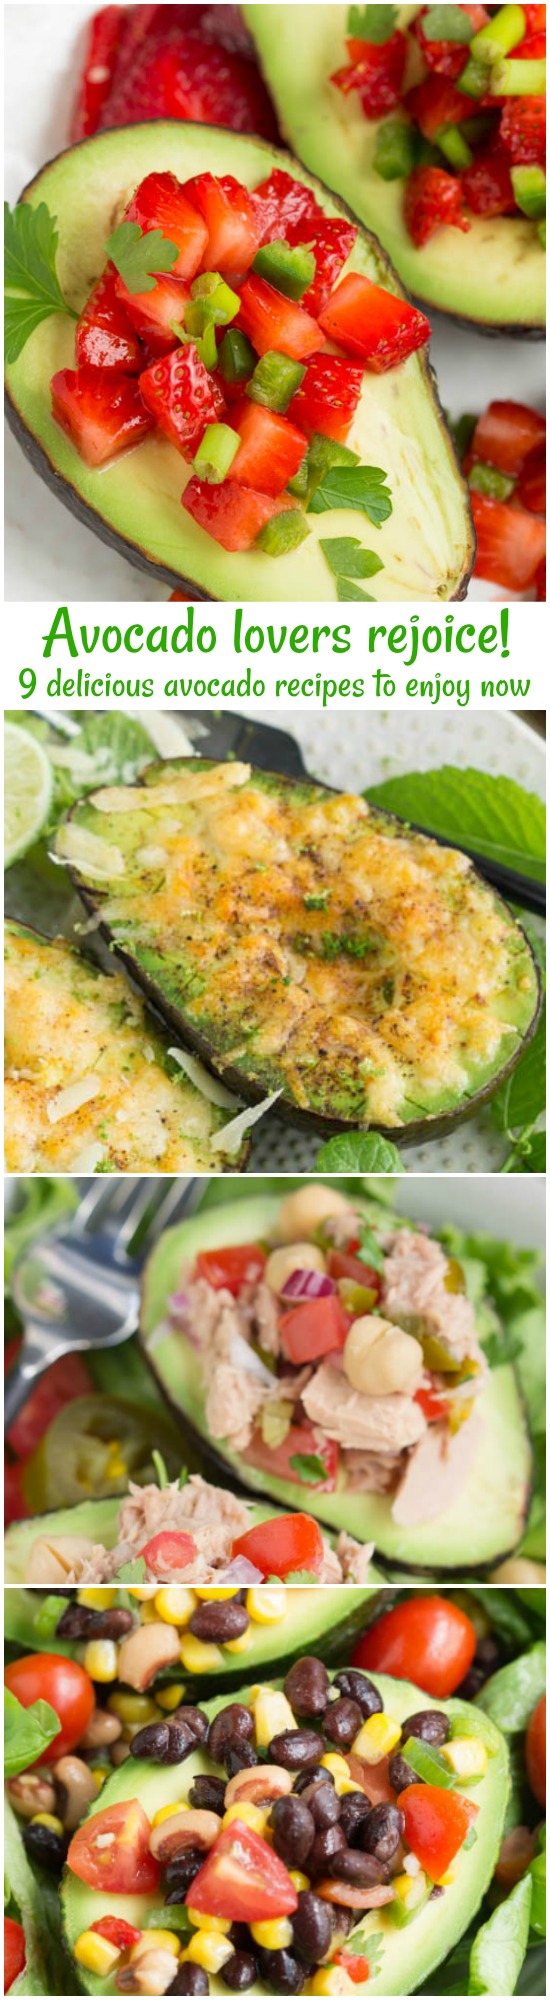 9 Avocado Recipes for a Healthy New Year. Everyone wants to start the year healthy and happy. To help you with your goals I collected 9 Favorite Avocado Recipes for a Healthy New Year!